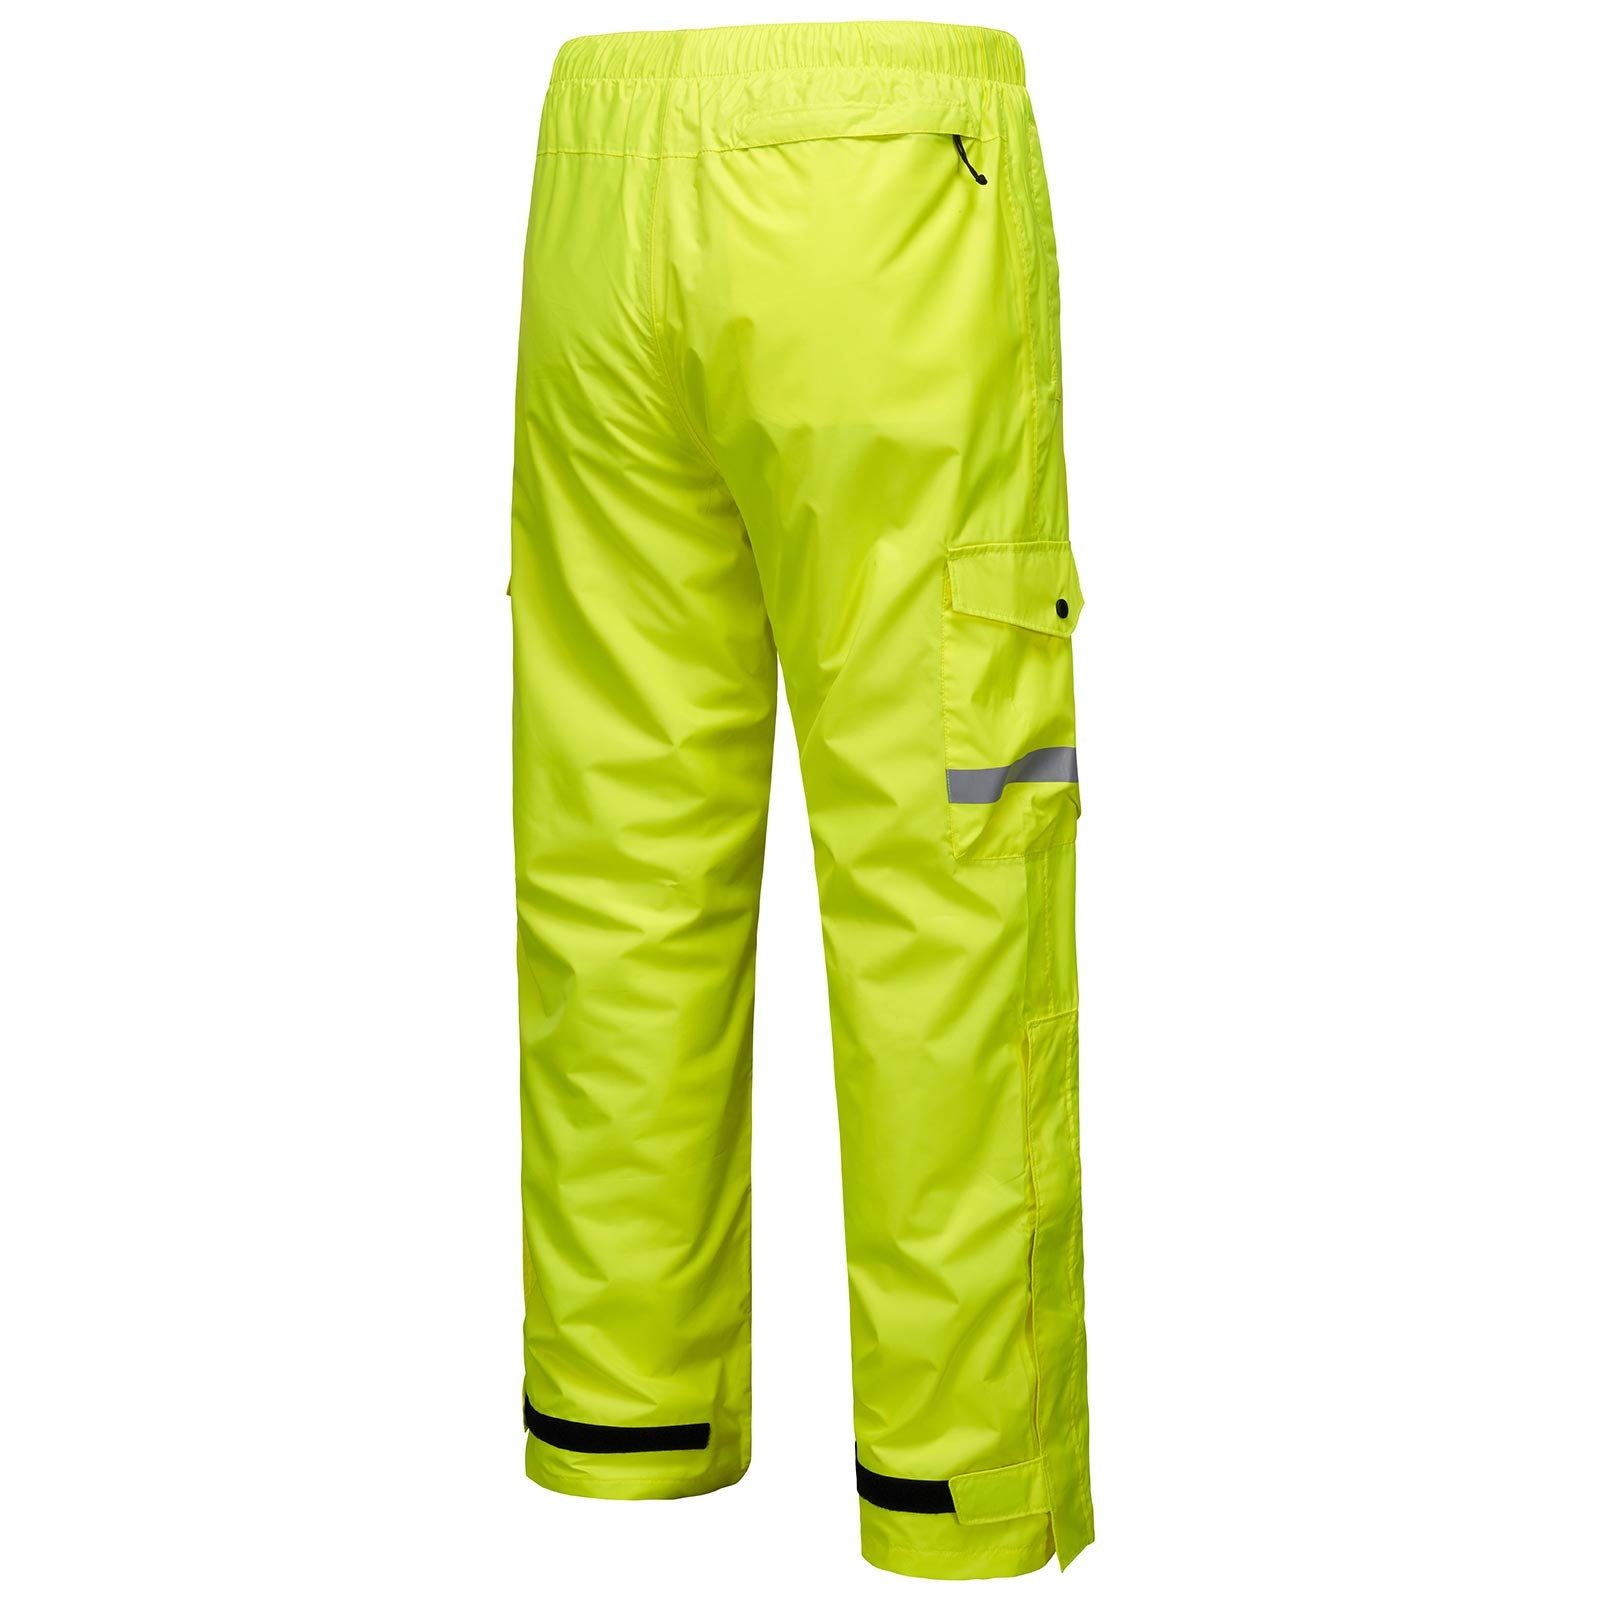 Water pants rubber half body waterproof clothes rain pants leather fork  water pants fishing whole body